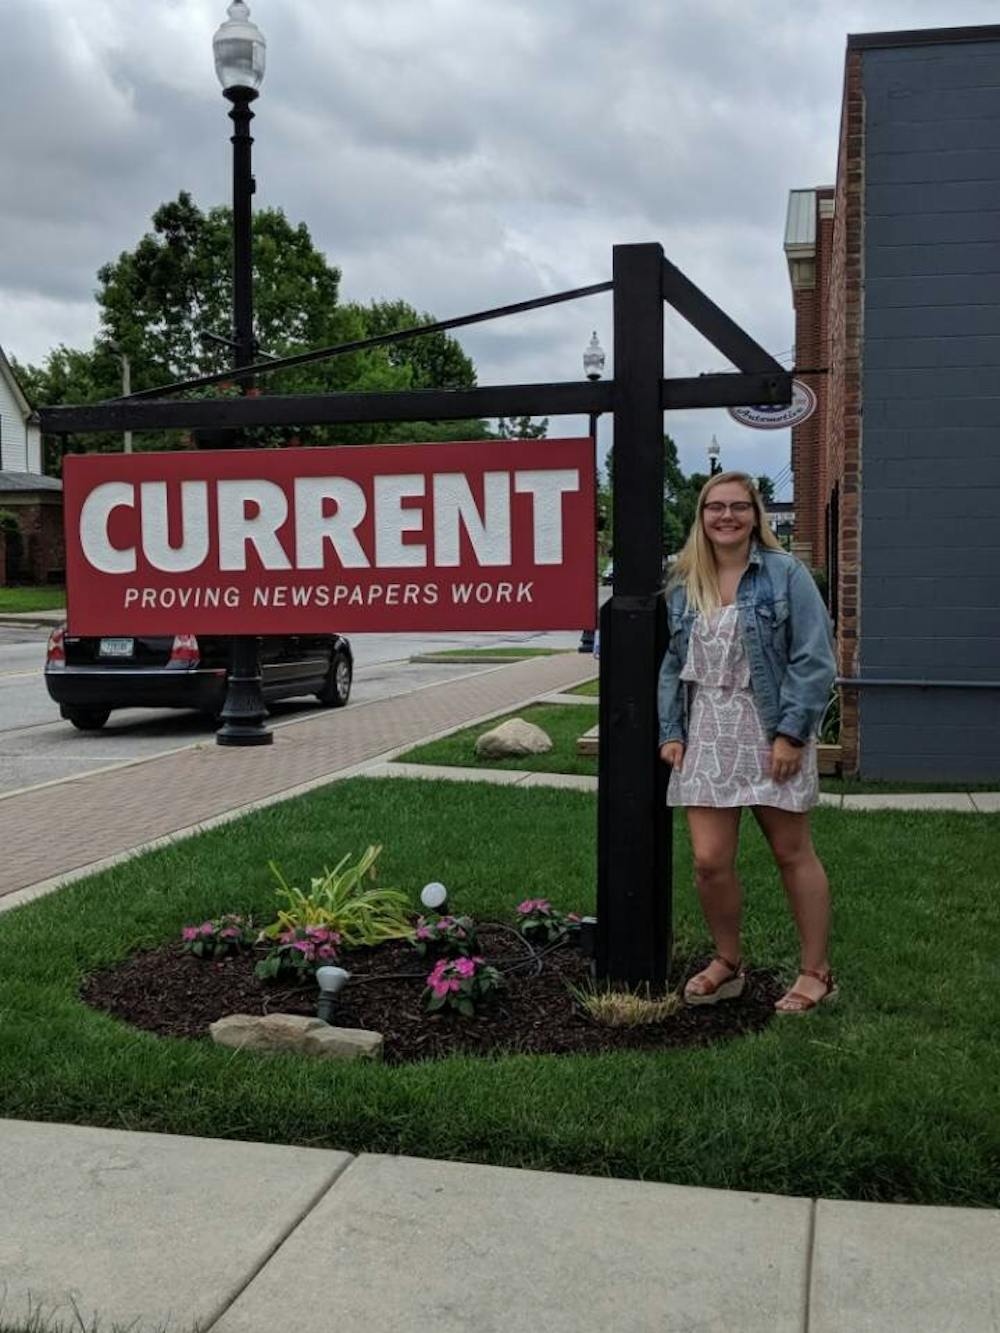 Sophie Nulph worked as an intern for Current Publishing in Hamilton County, Indiana during the summer of 2019. She wrote news and features about various cities around the county, such as Westfield, Carmel and Fishers. Sophie Nulph, photo provided.